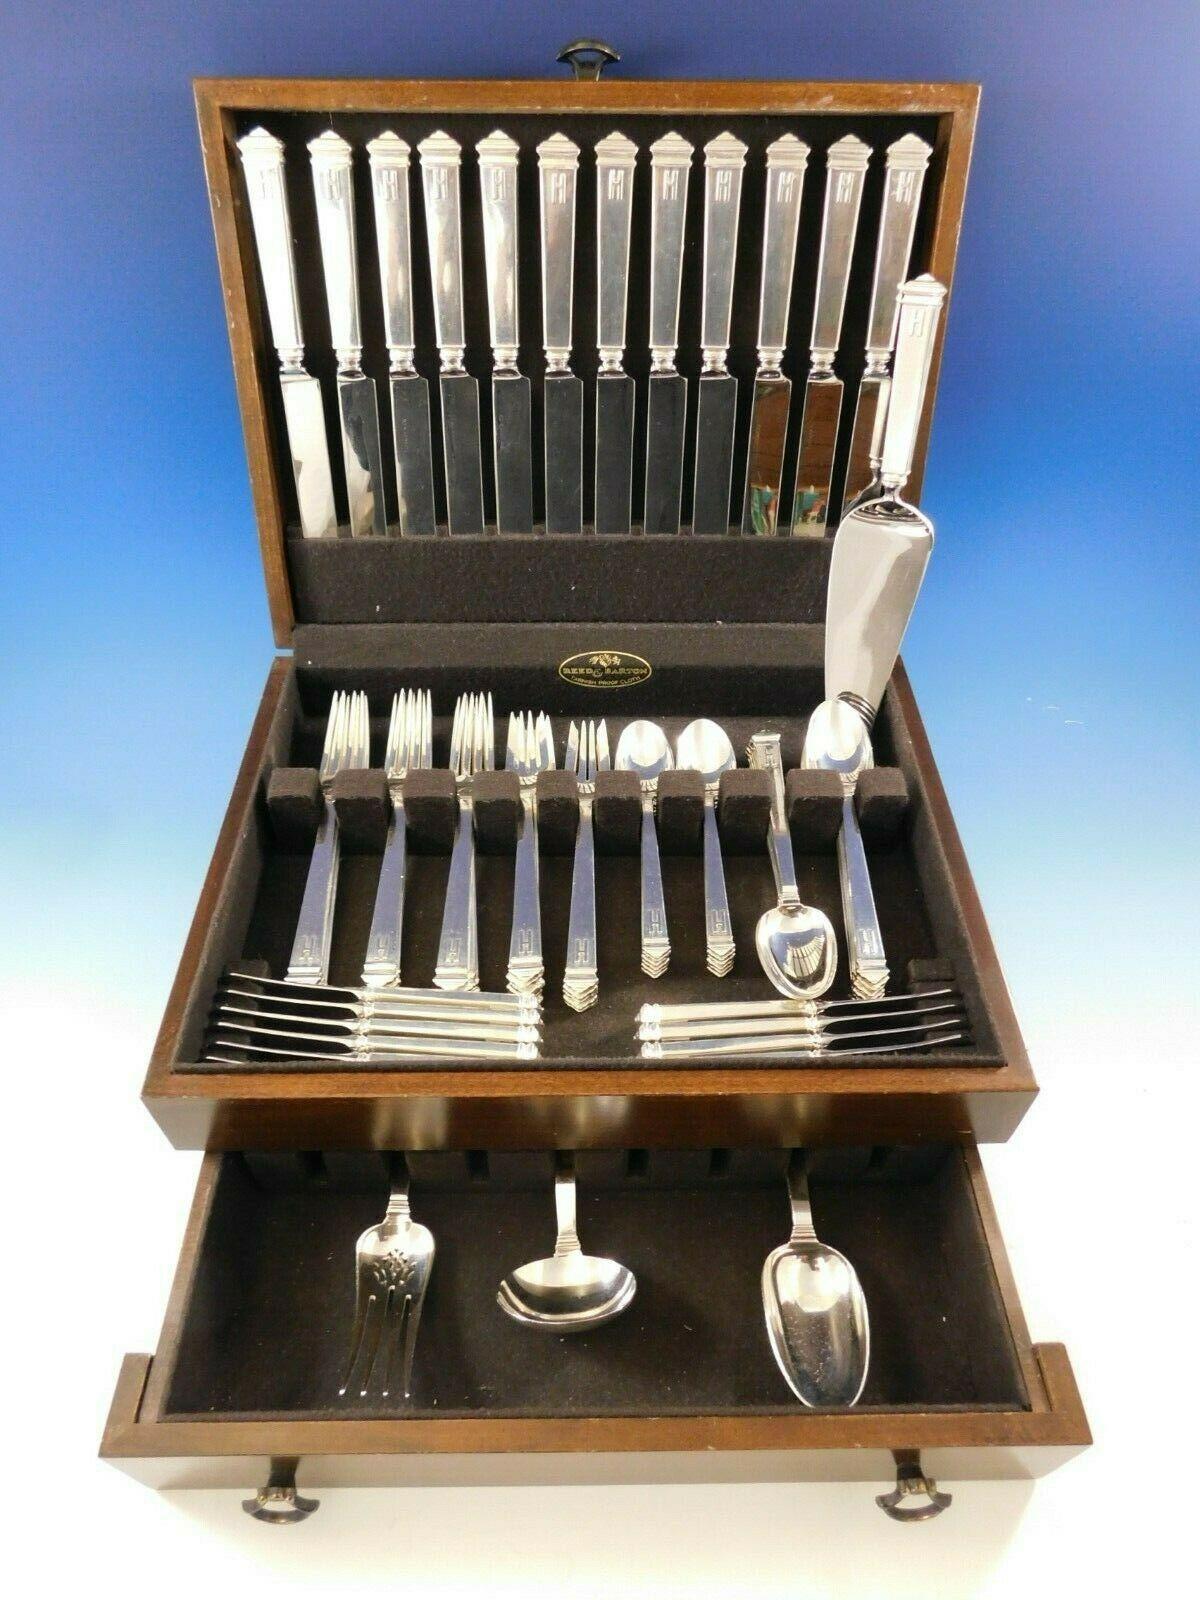 Dinner size Hampton by Tiffany and Co. sterling silver flatware set, 74 pieces with vintage applied 